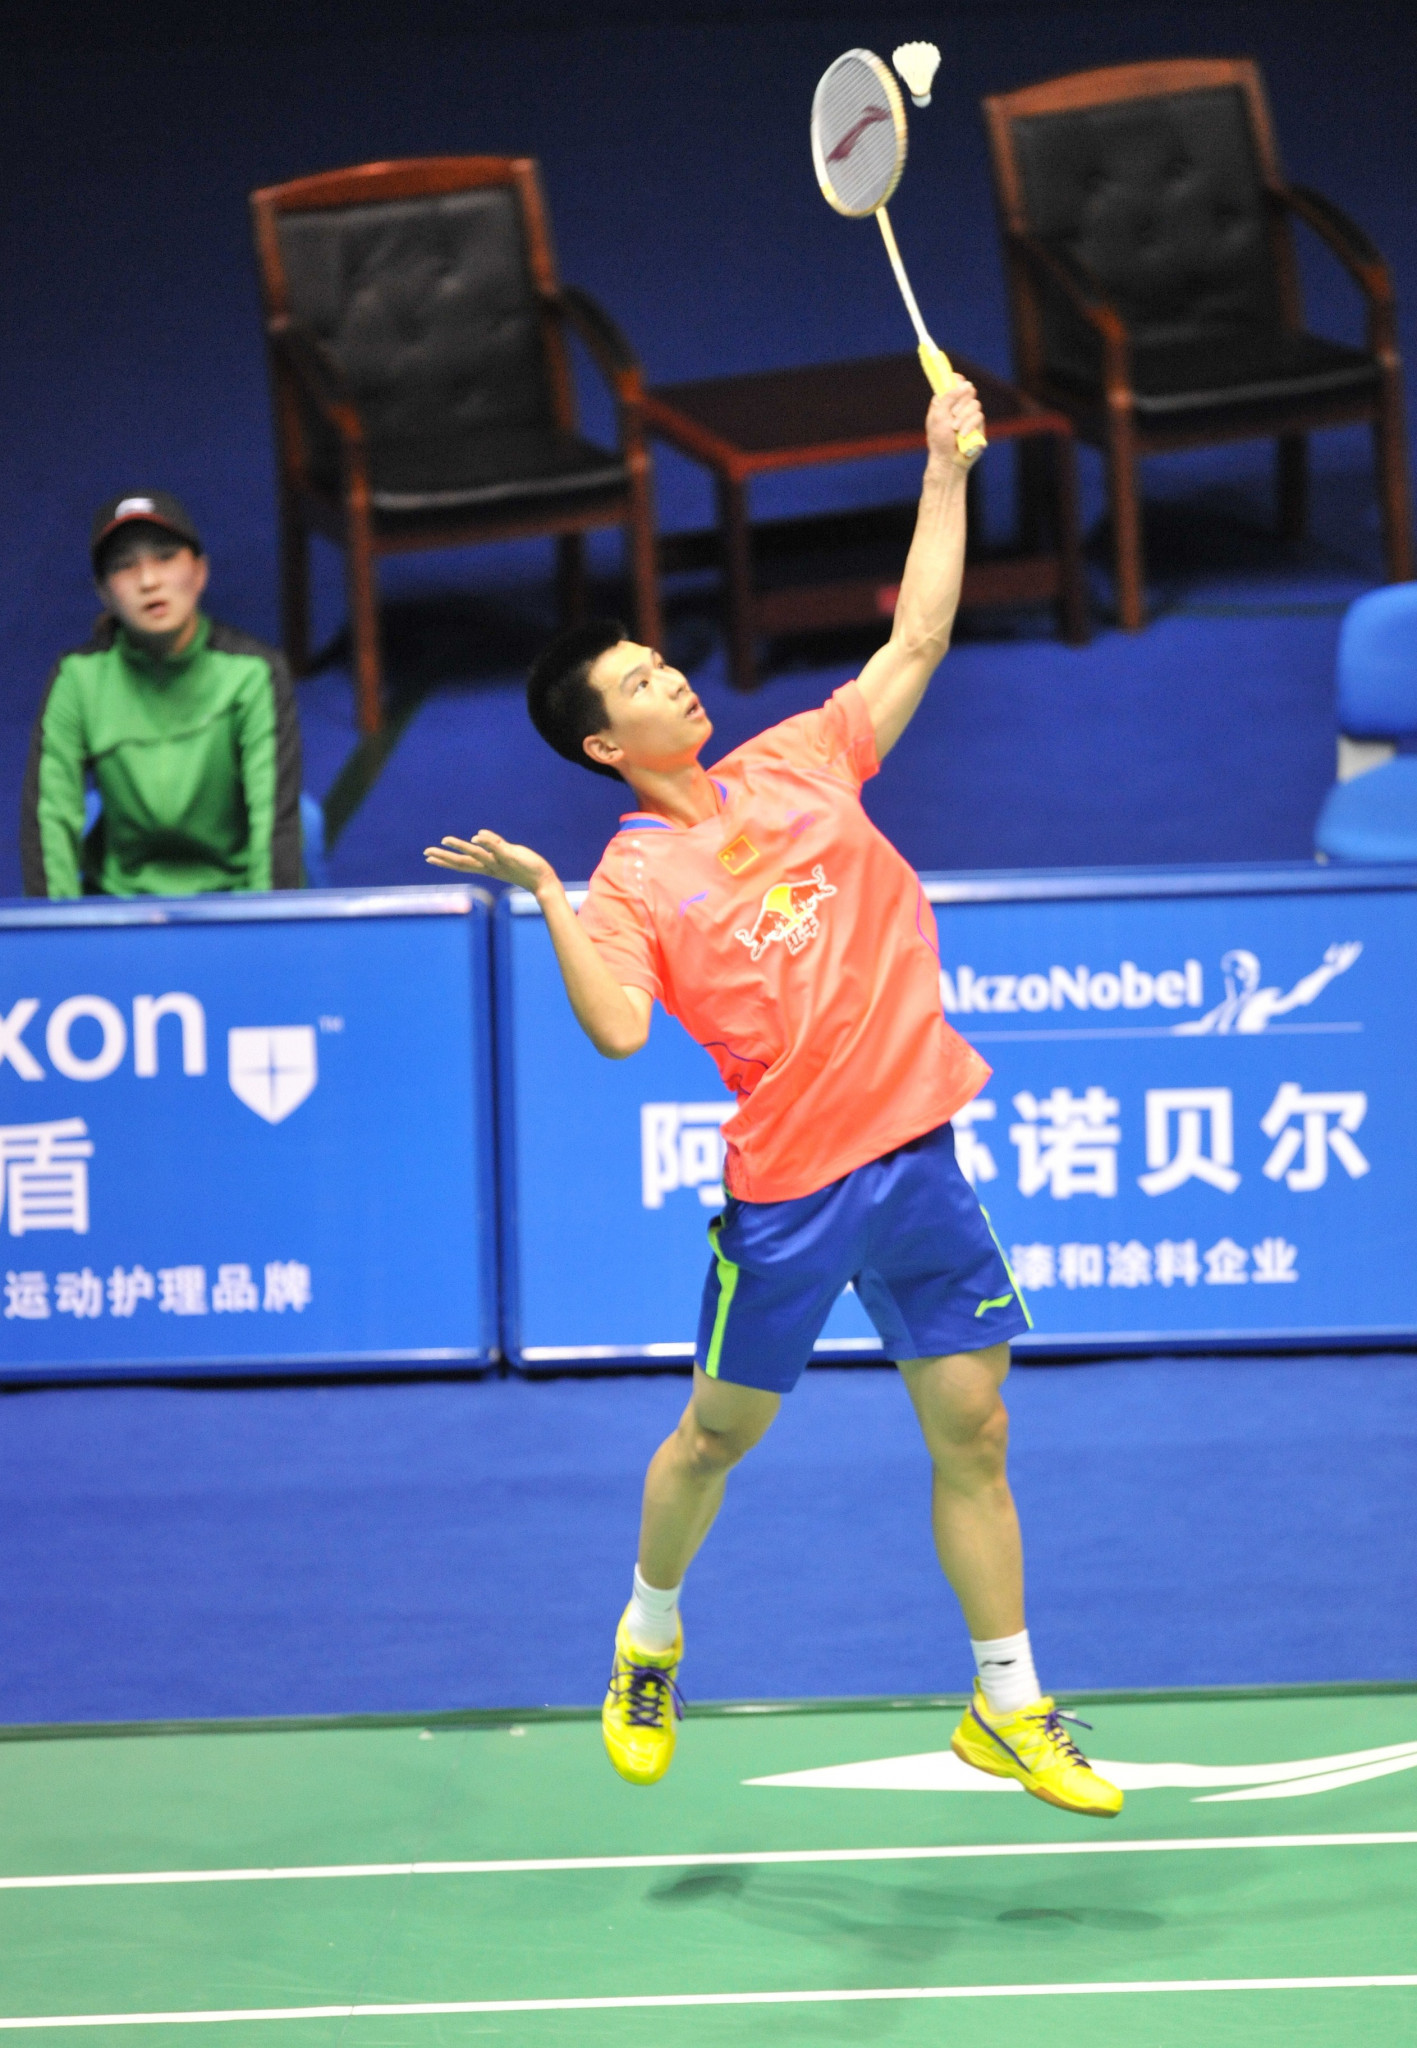 Zhao Junpeng was one of two Chinese players to come through qualifying and reach the main draw at the BWF Korea Open ©BWF